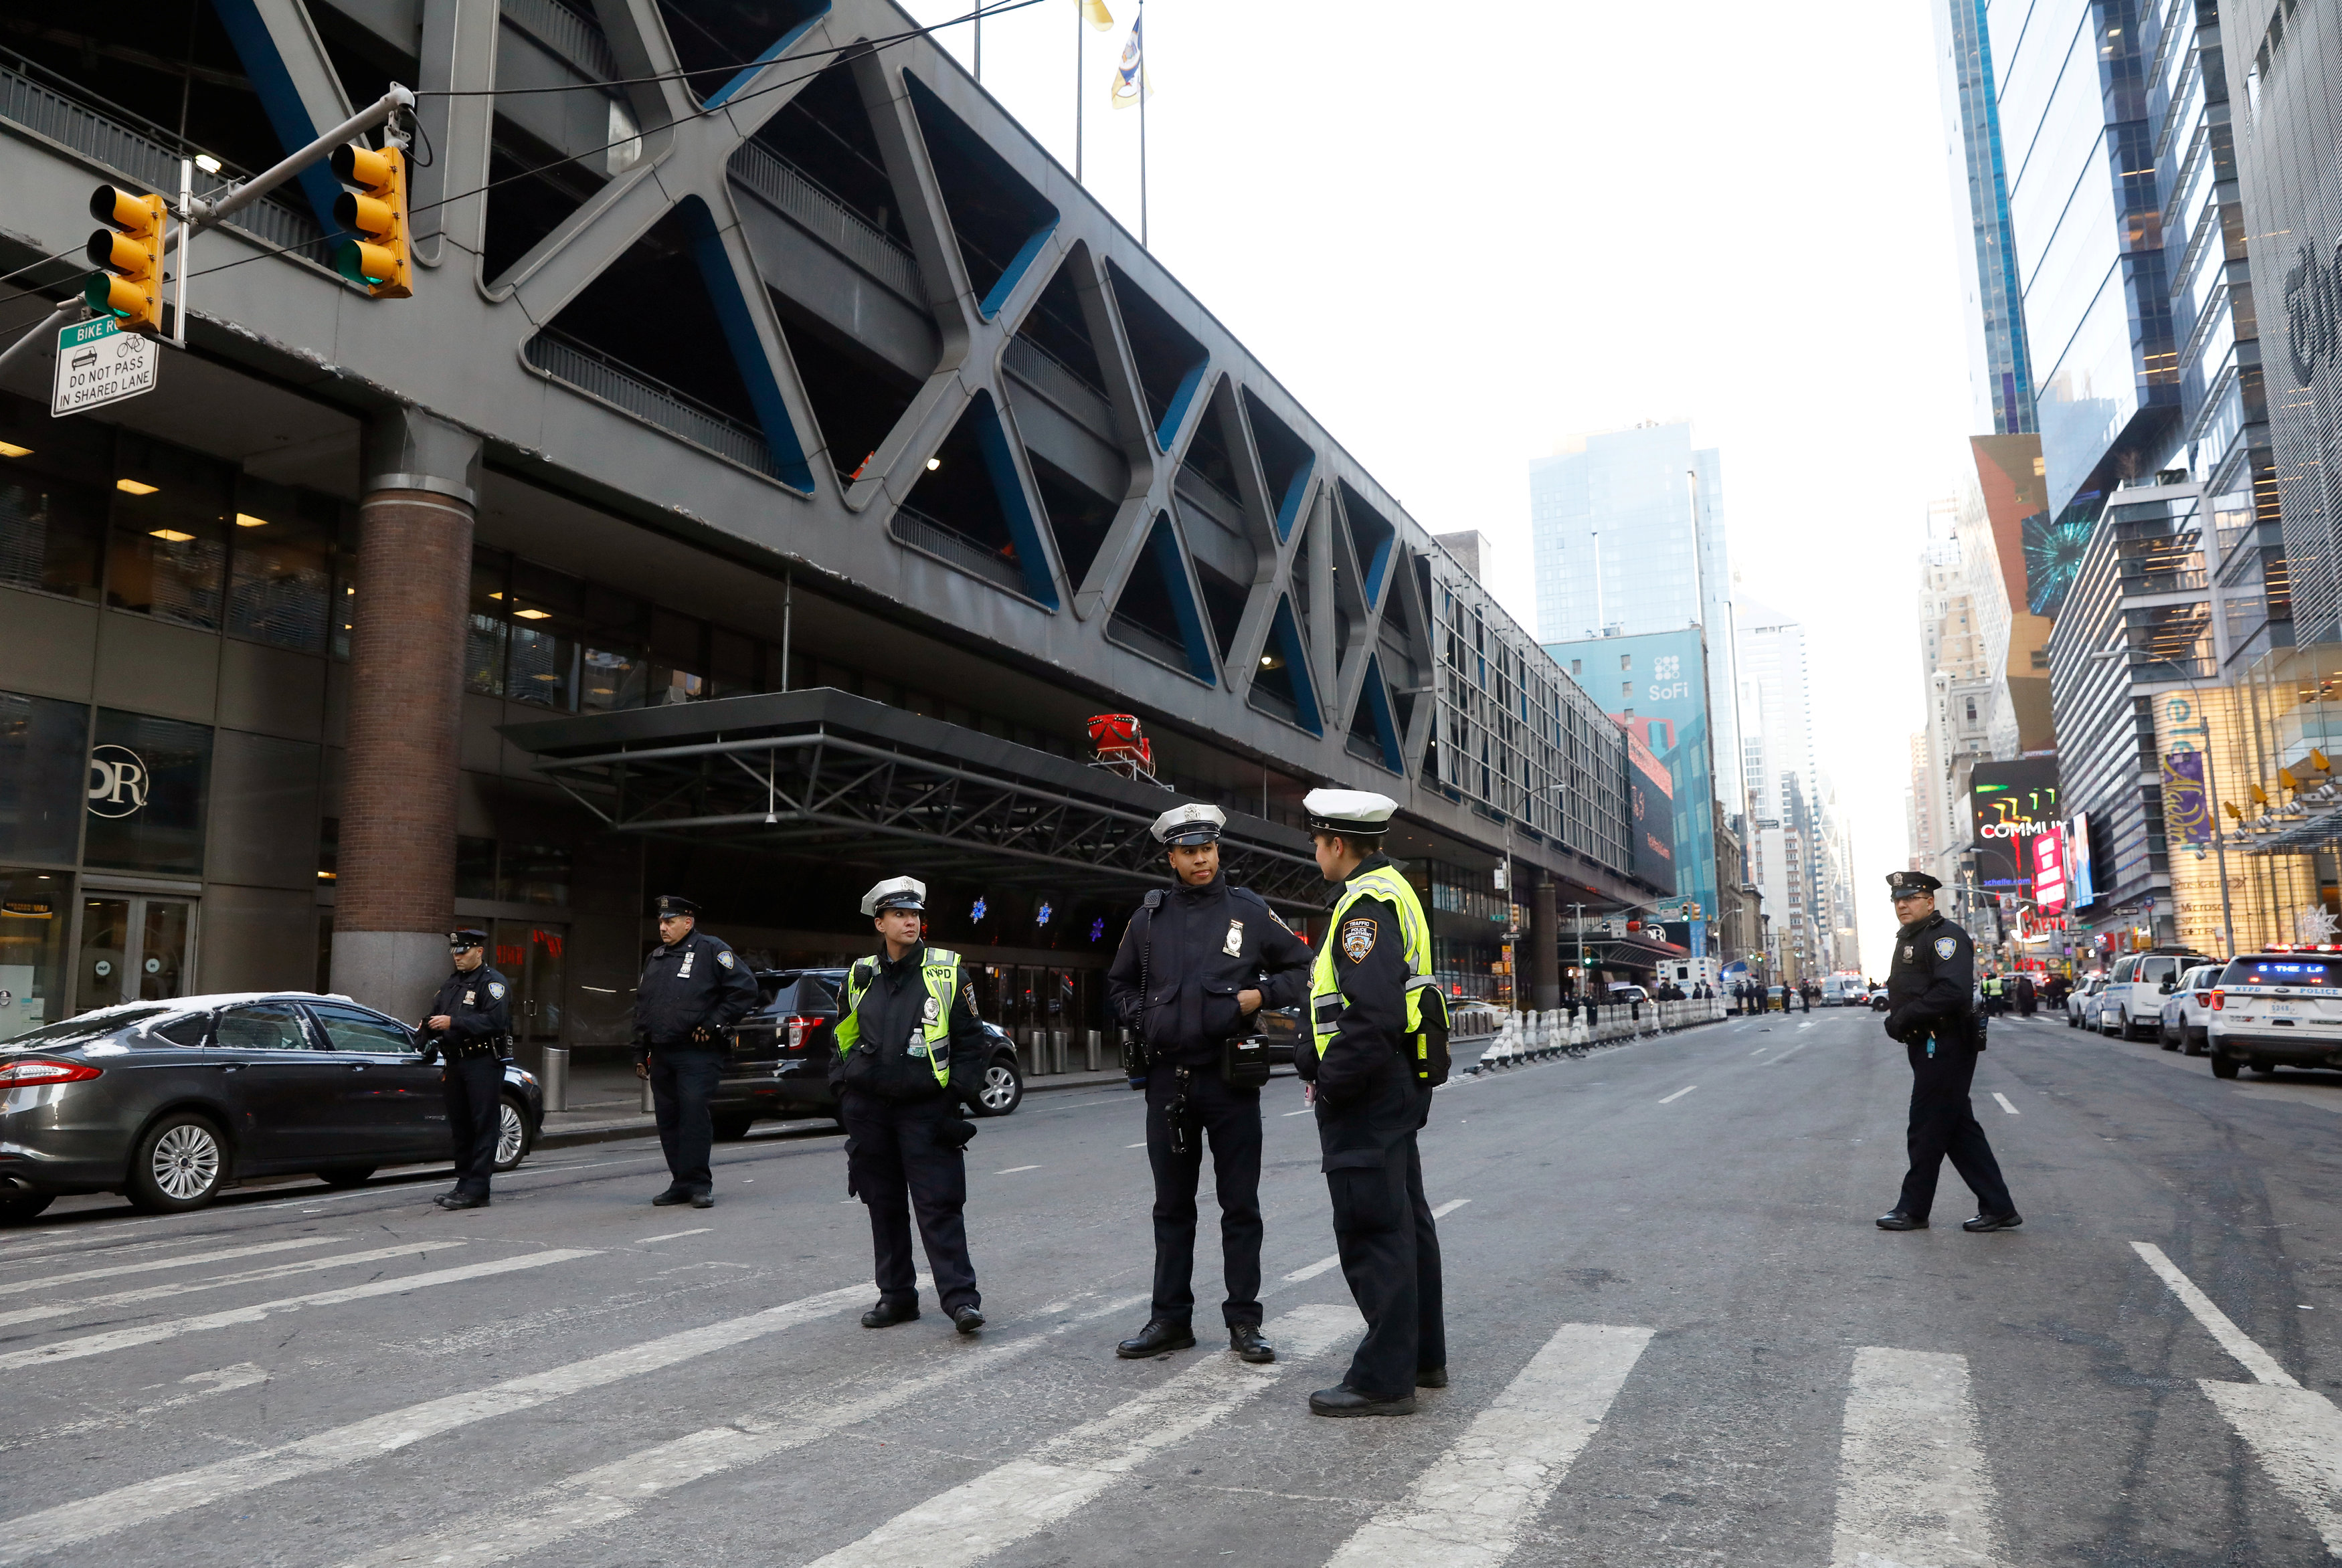 In pictures: 'Attempted terror' attack in New York